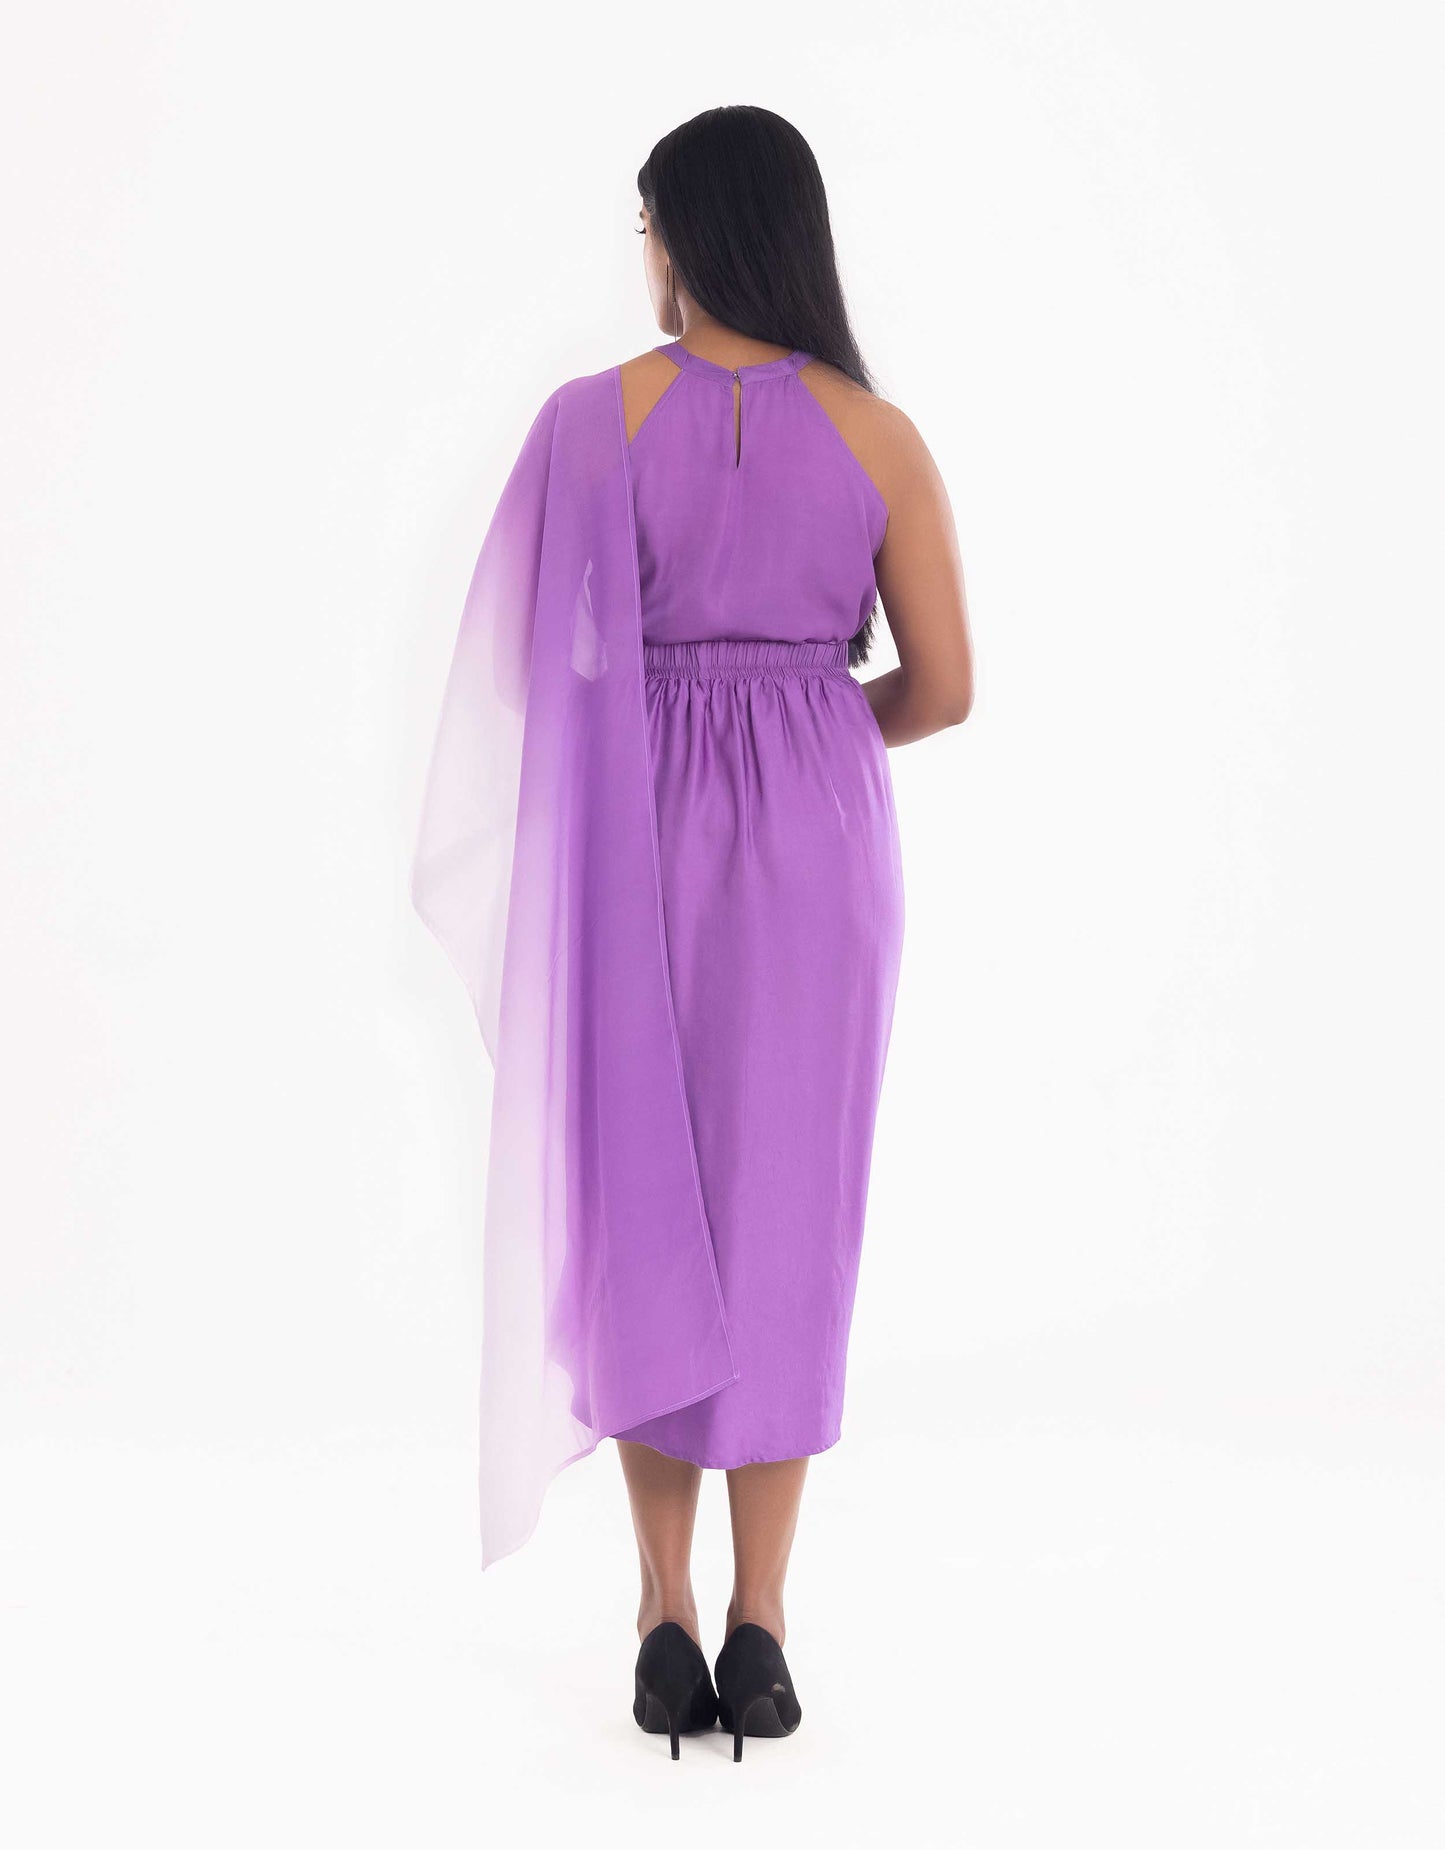 Hueloom purple Allure convertible capsule with top and skirt back view display.